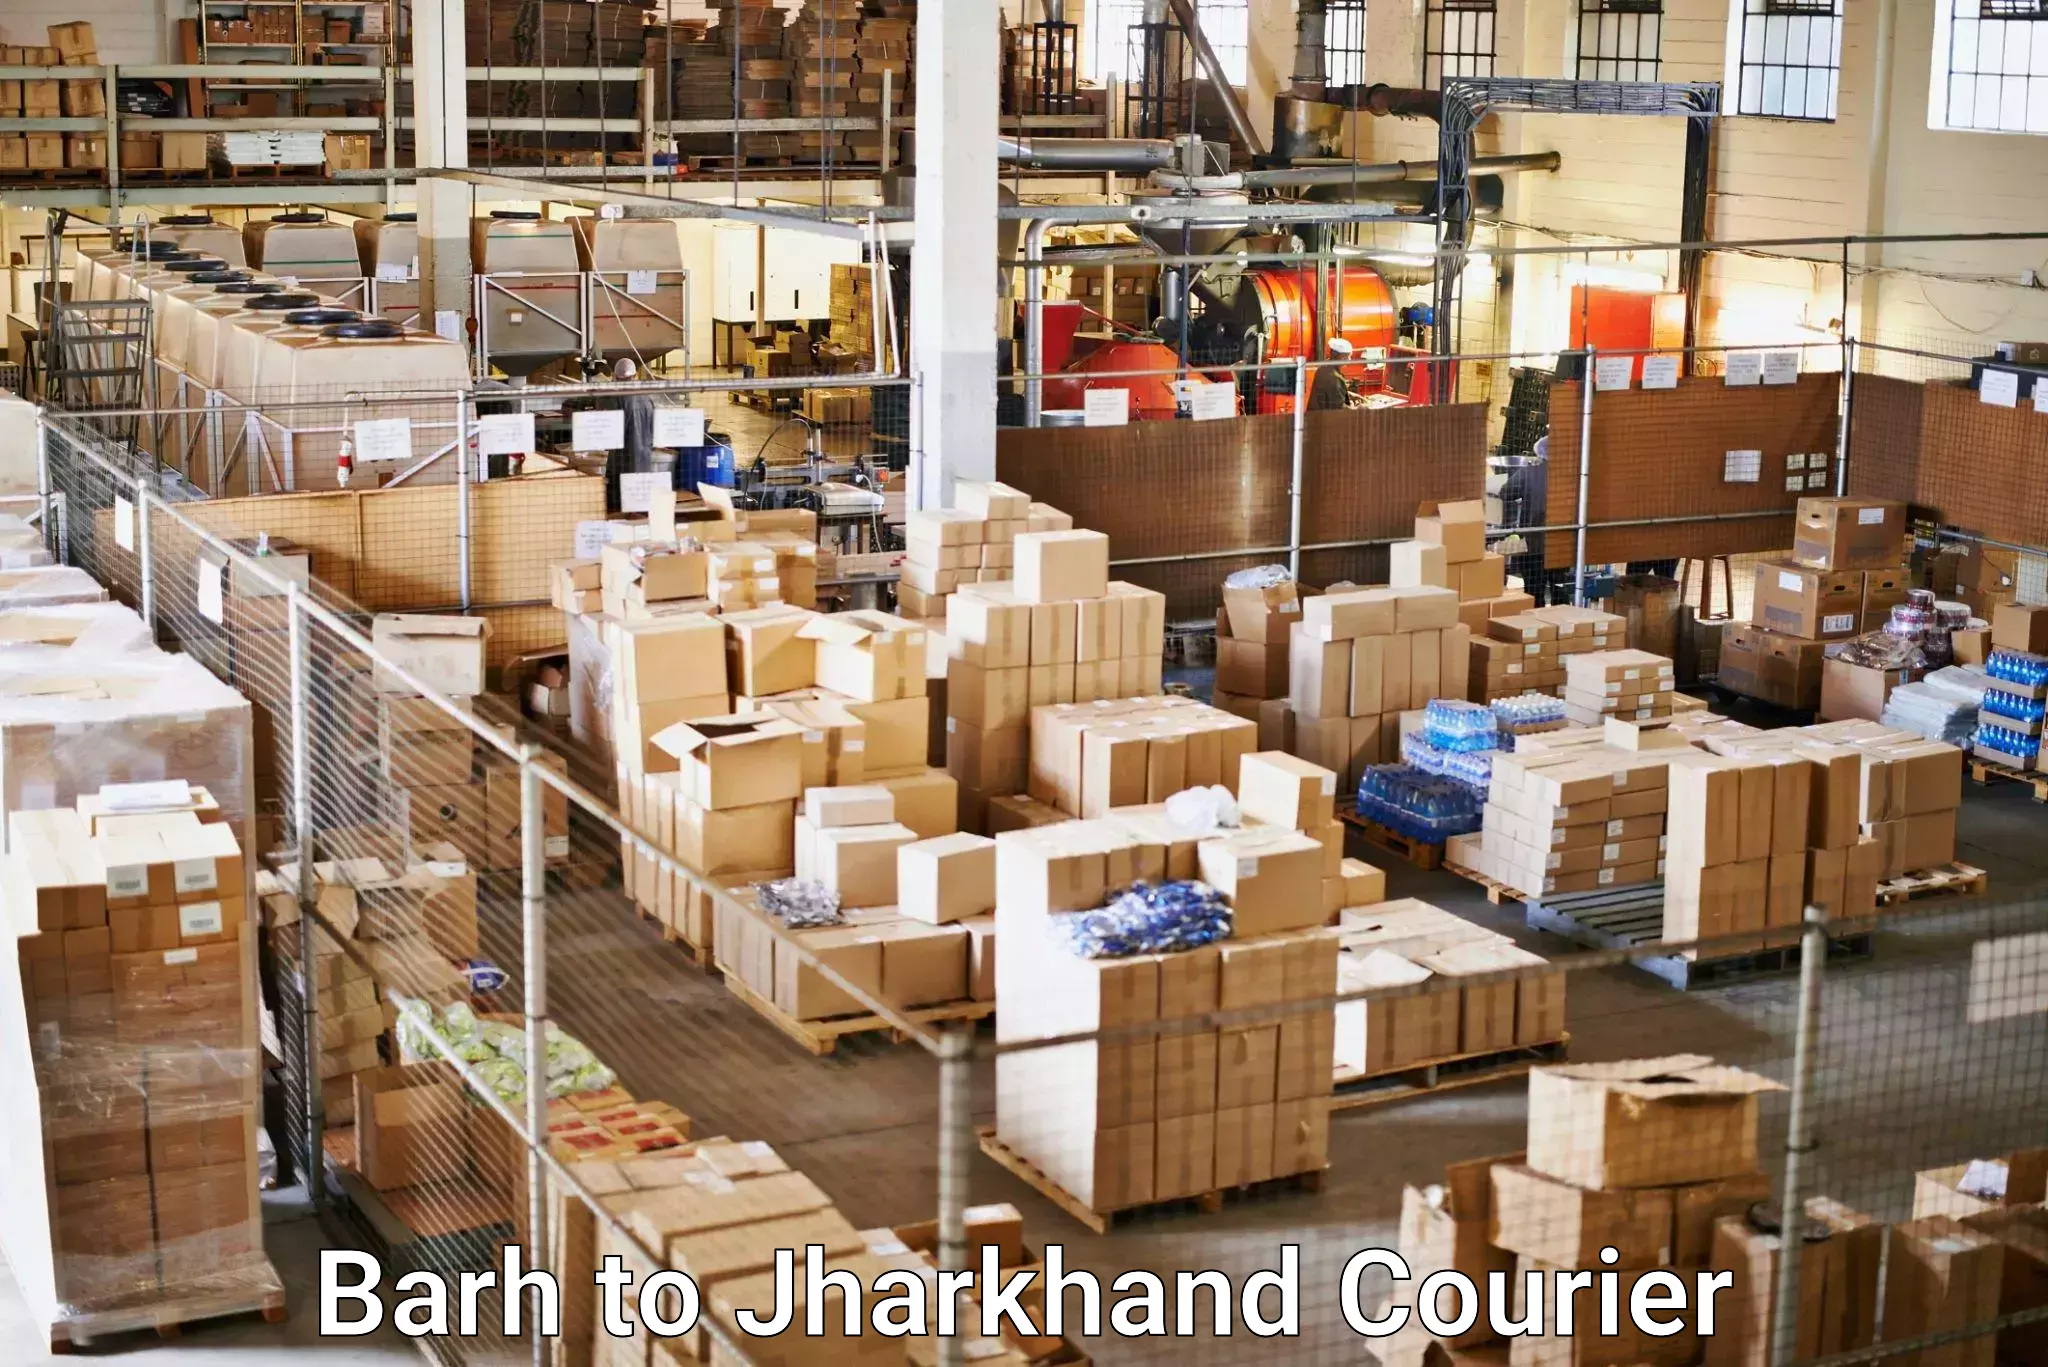 Package delivery network Barh to Barki Saria